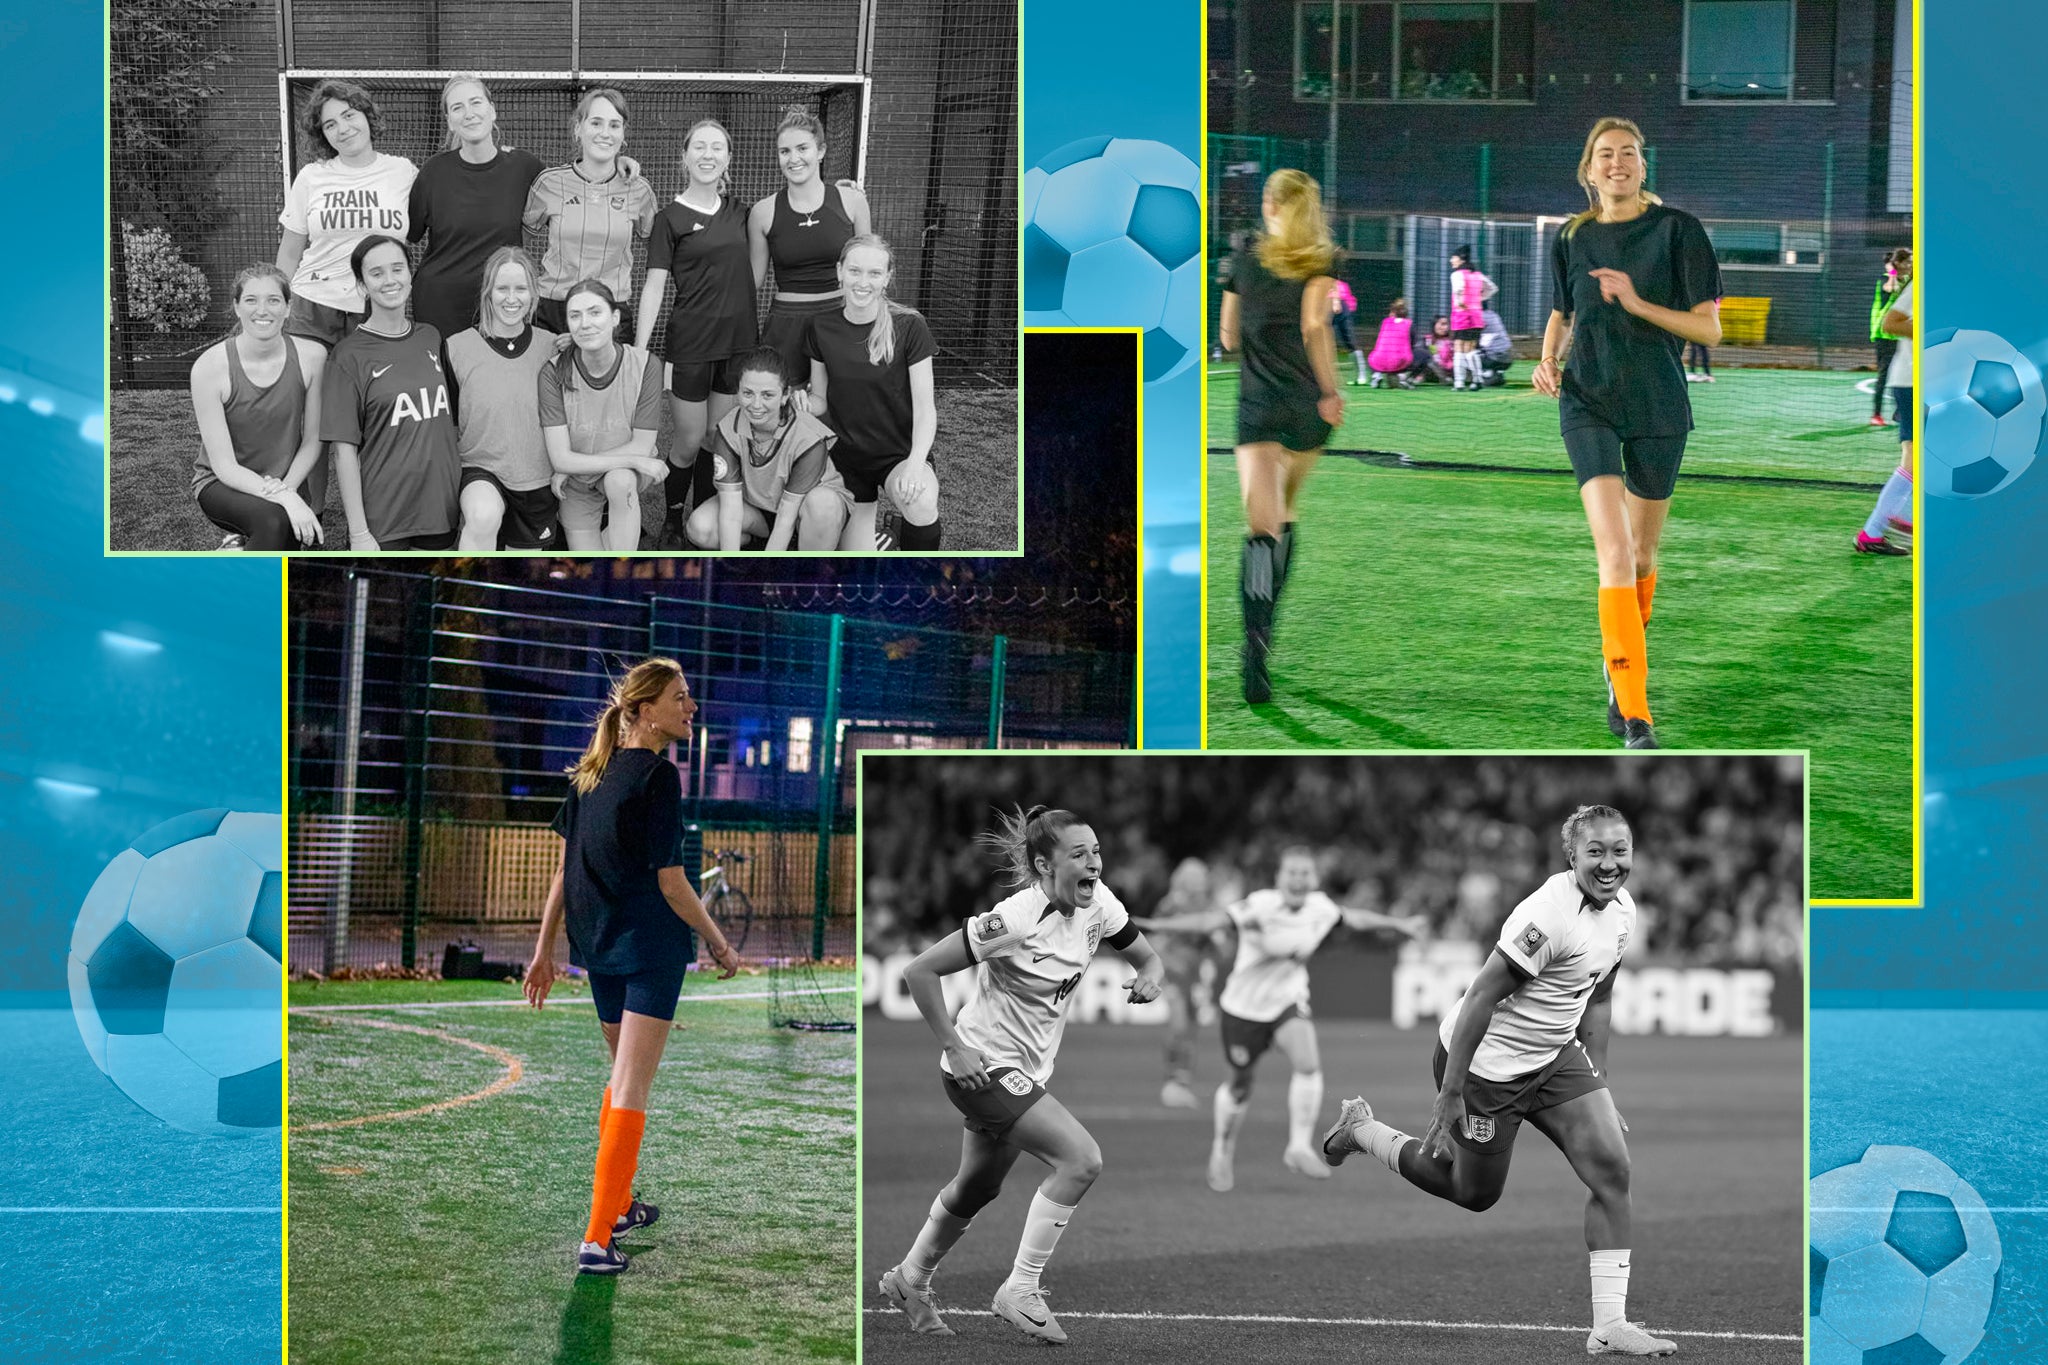 Sowing seeds: so many grassroots teams – like Ellie’s – have been inspired by the Lionesses